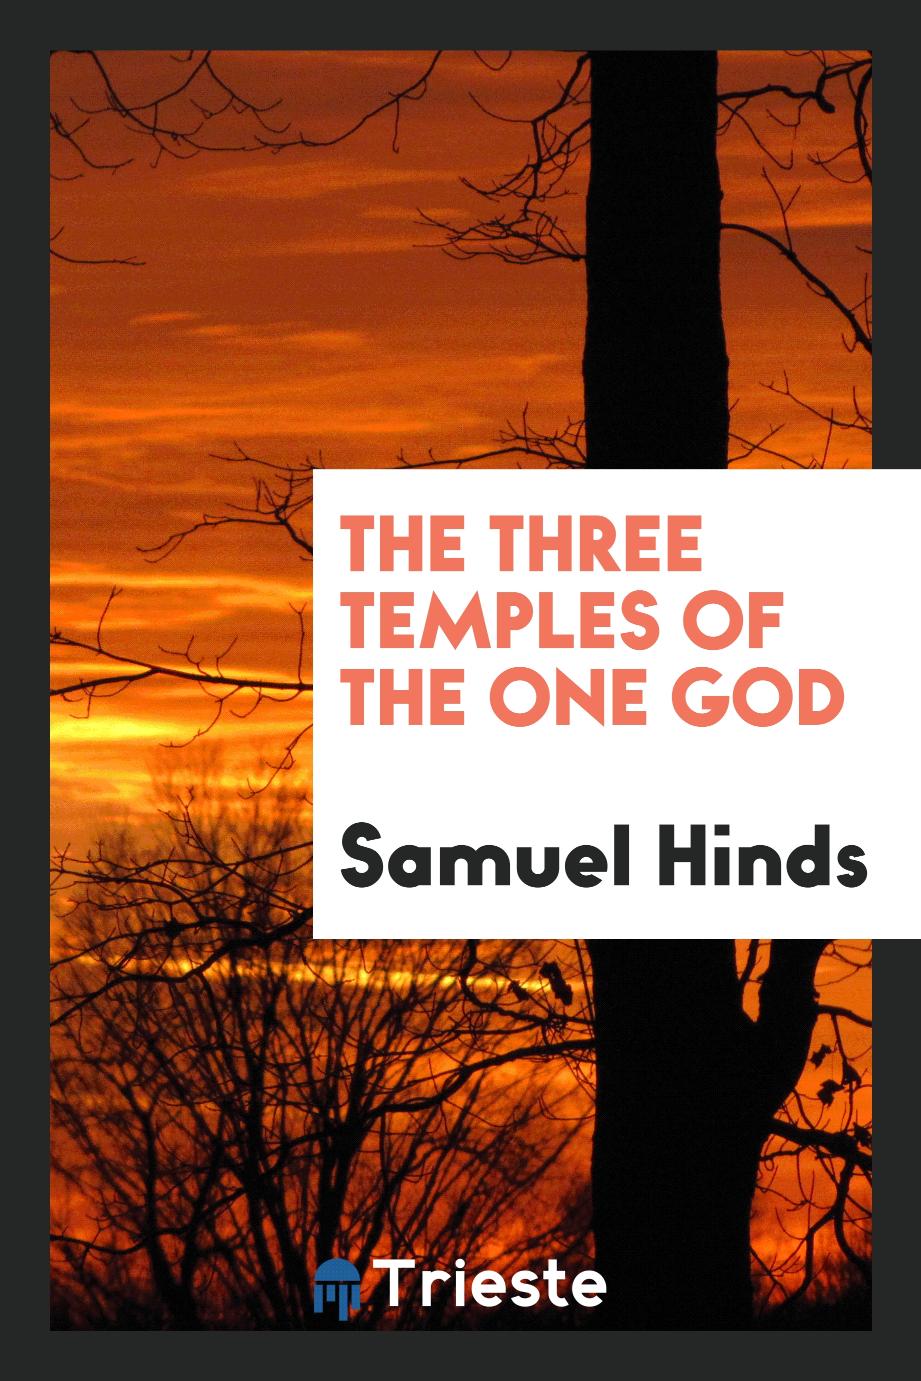 The Three Temples of the One God